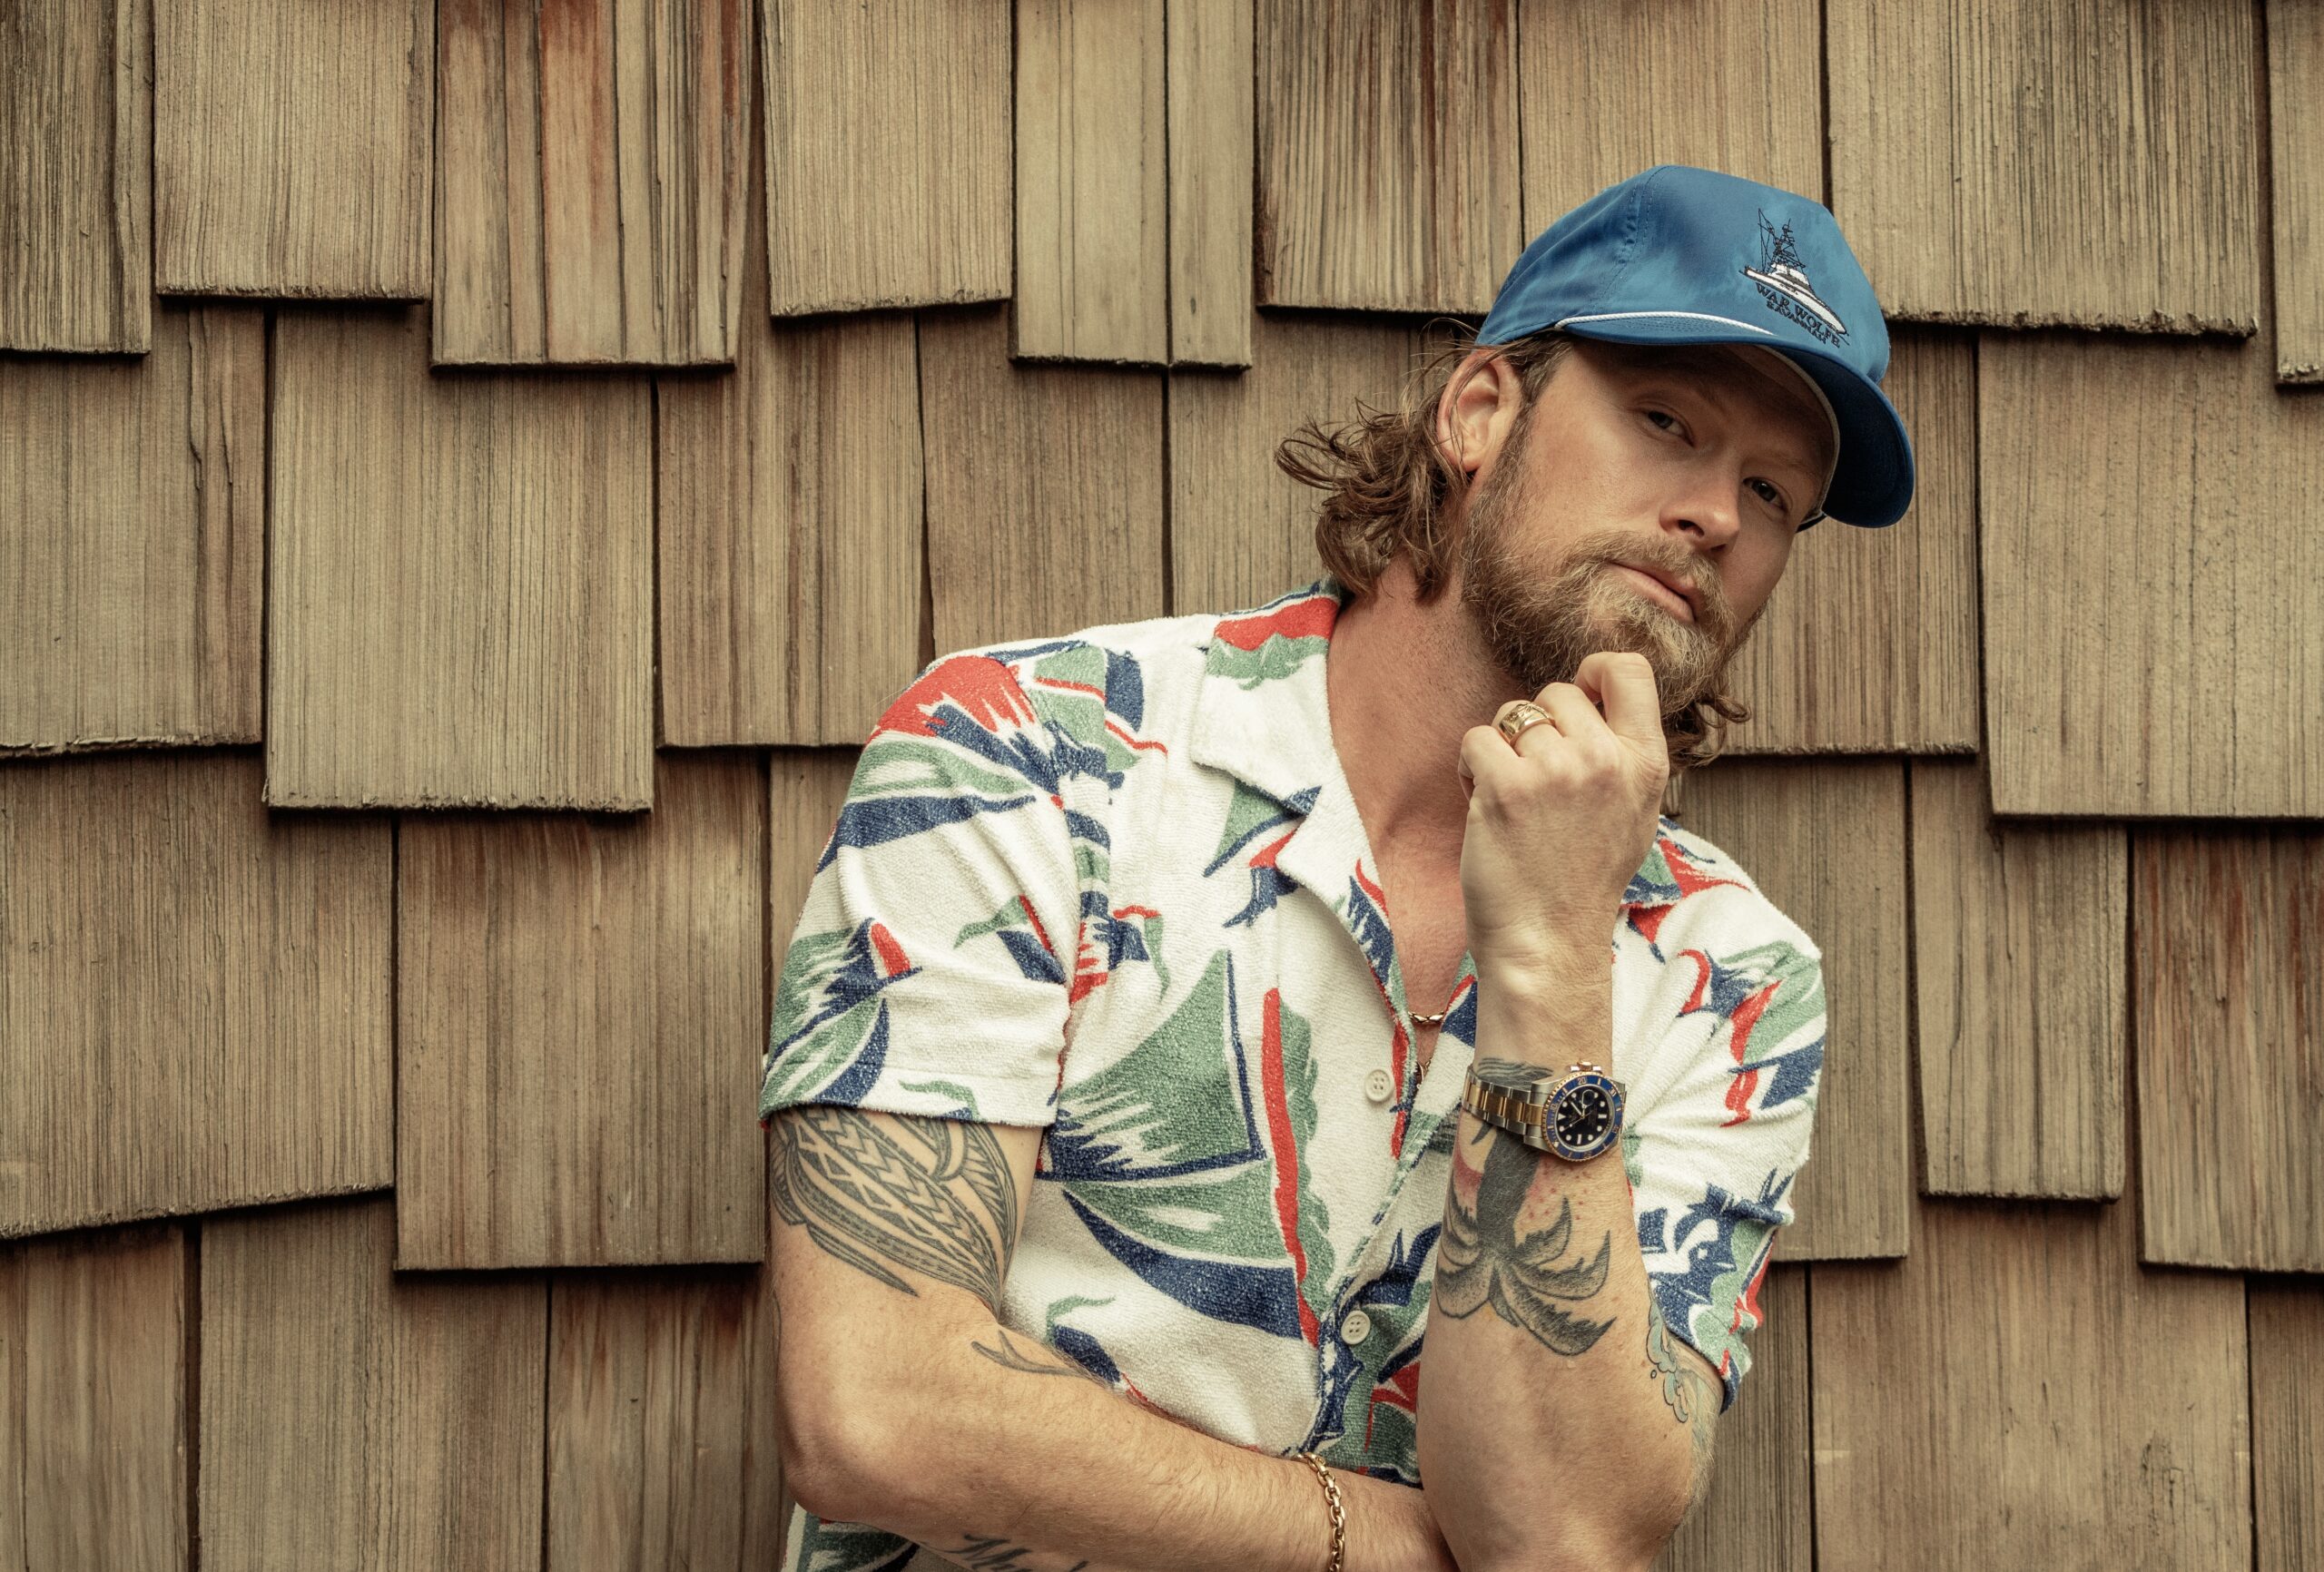 New Music Friday: Brian Kelley is Opening a New Door with New Song “Kiss My Boots” and More